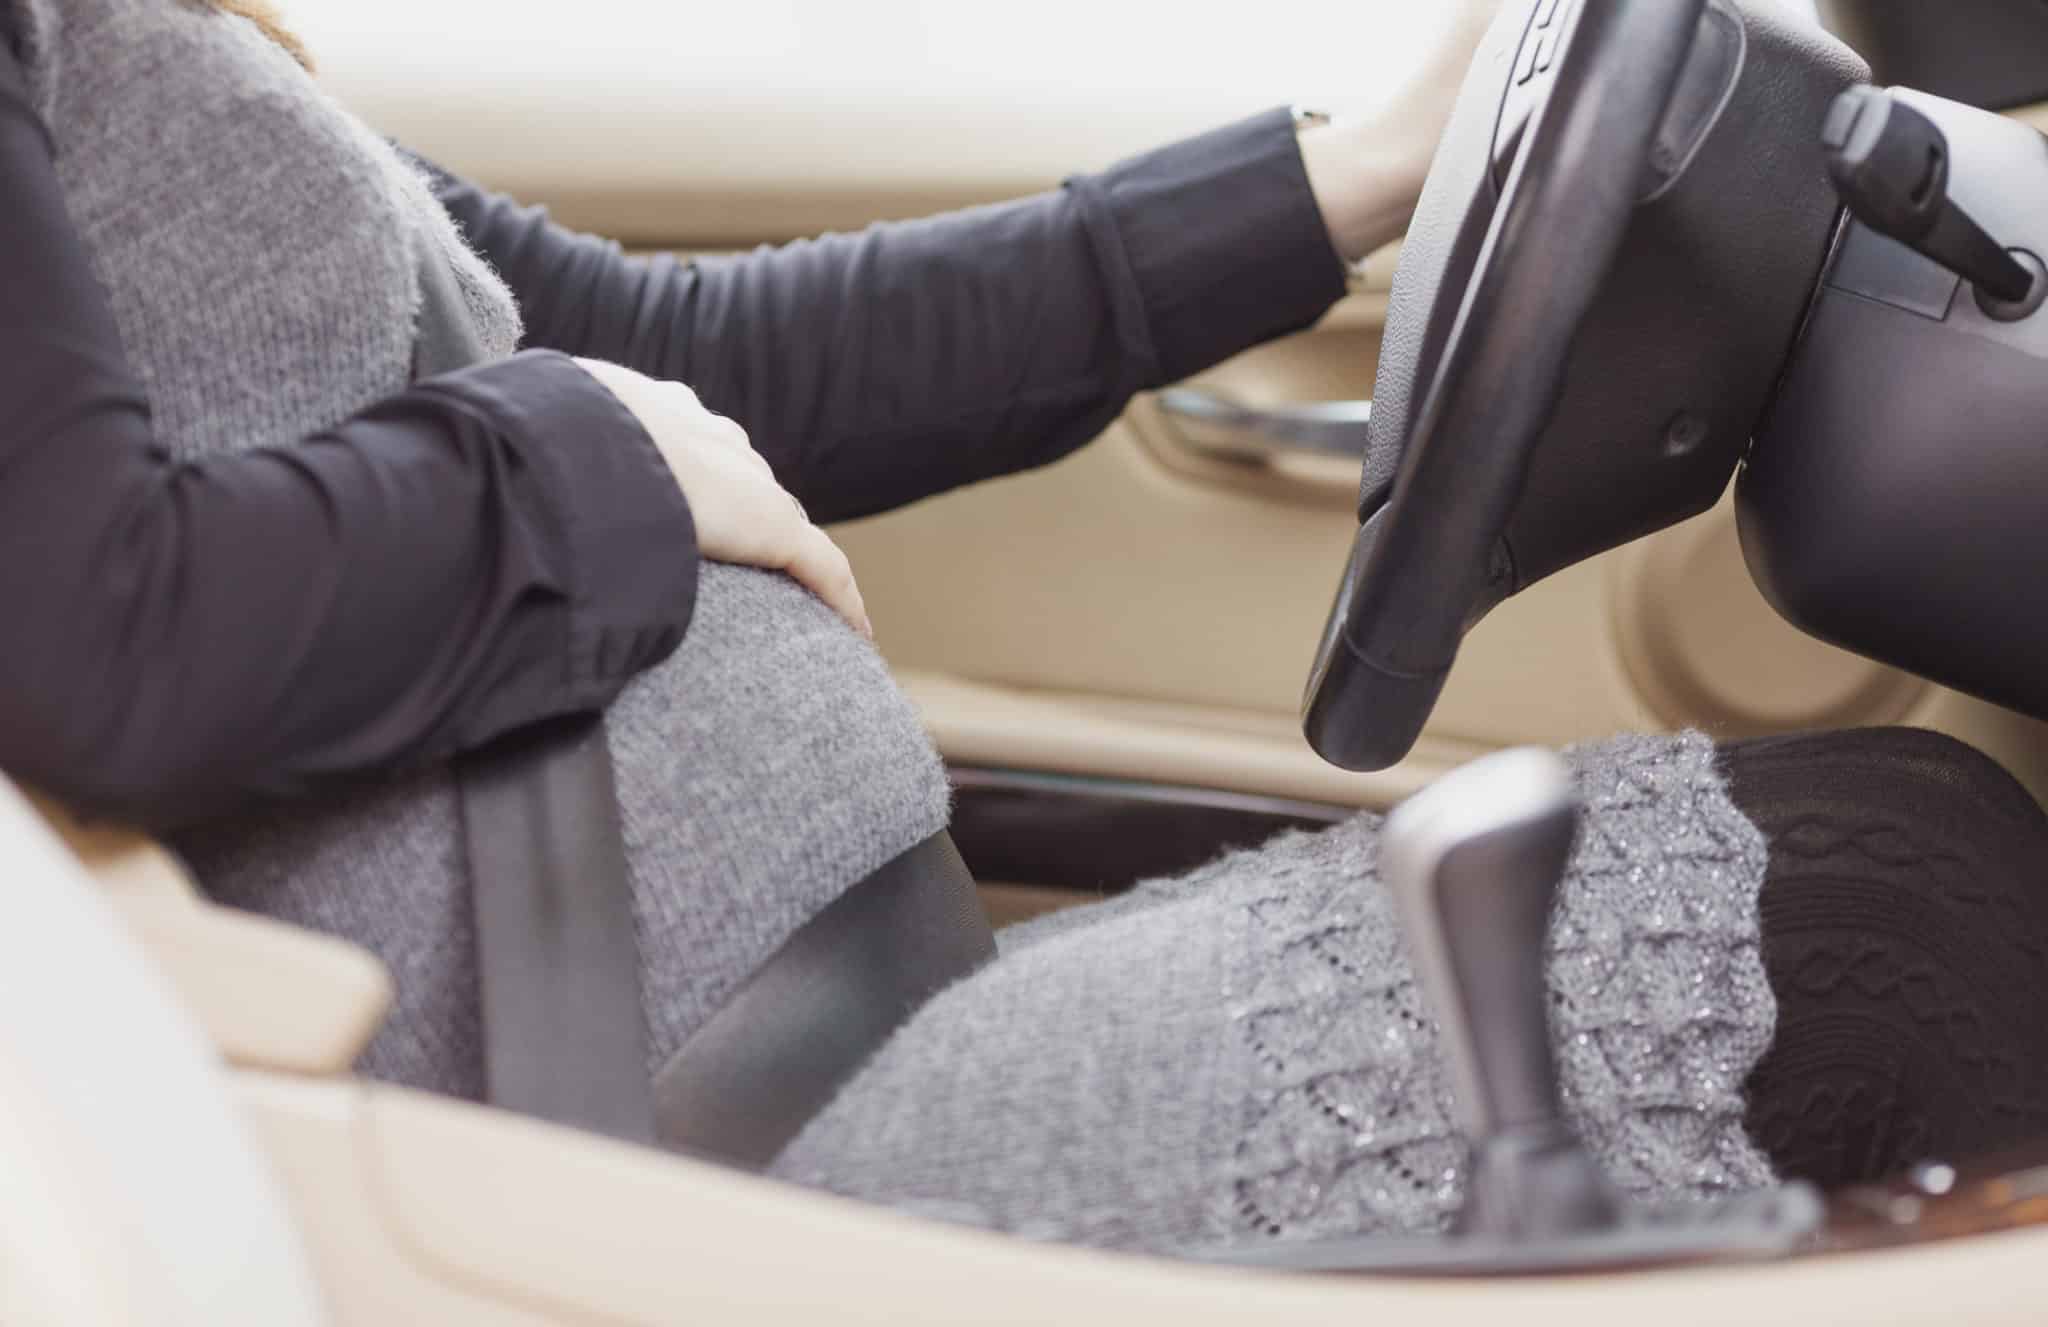 Pregnant woman driving a car with one hand